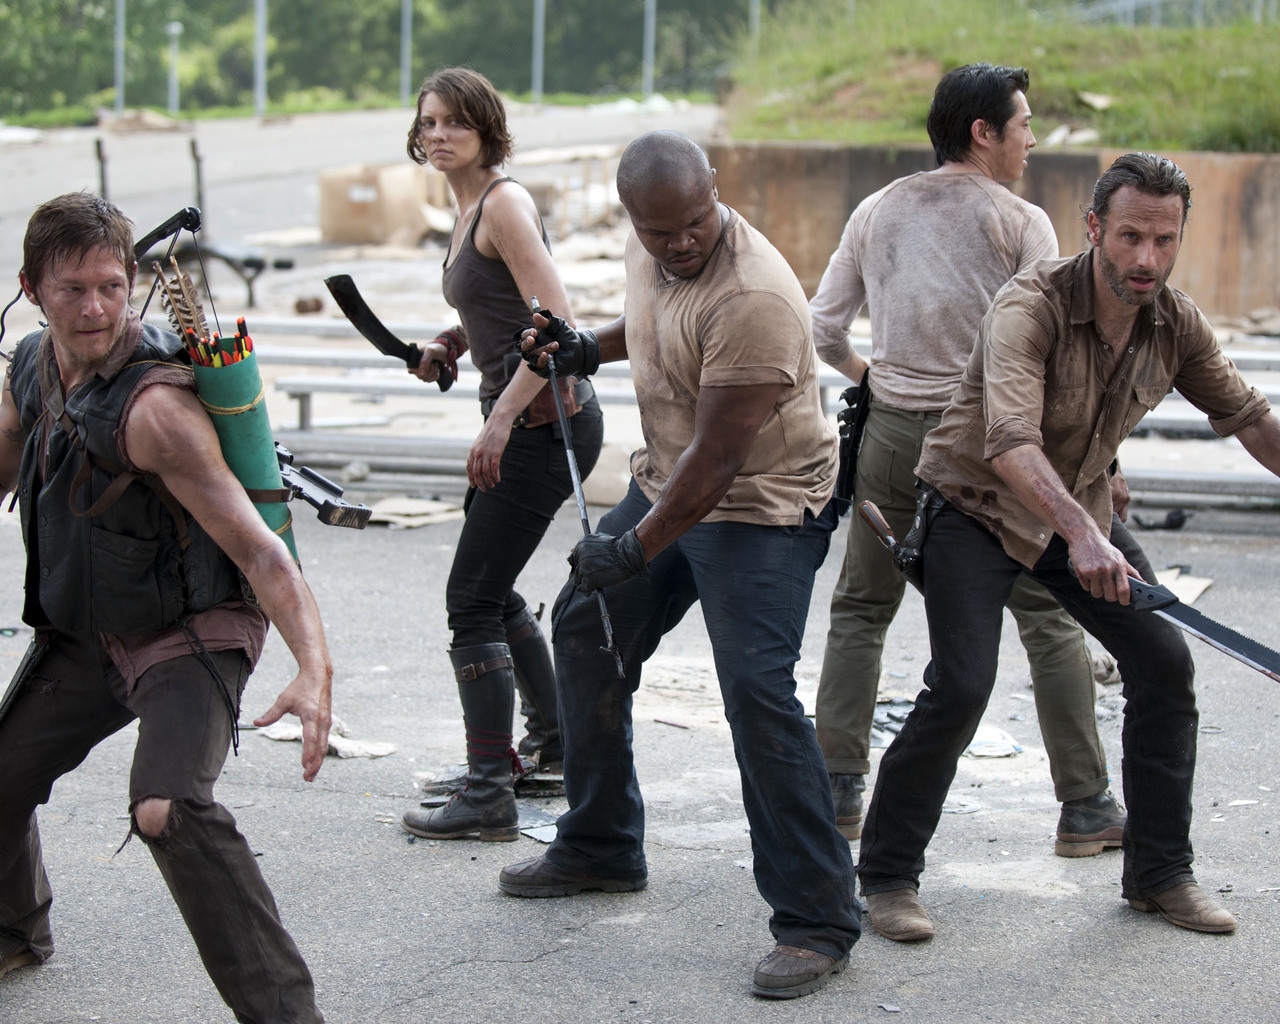 The Walking Dead Cast for 1280 x 1024 resolution